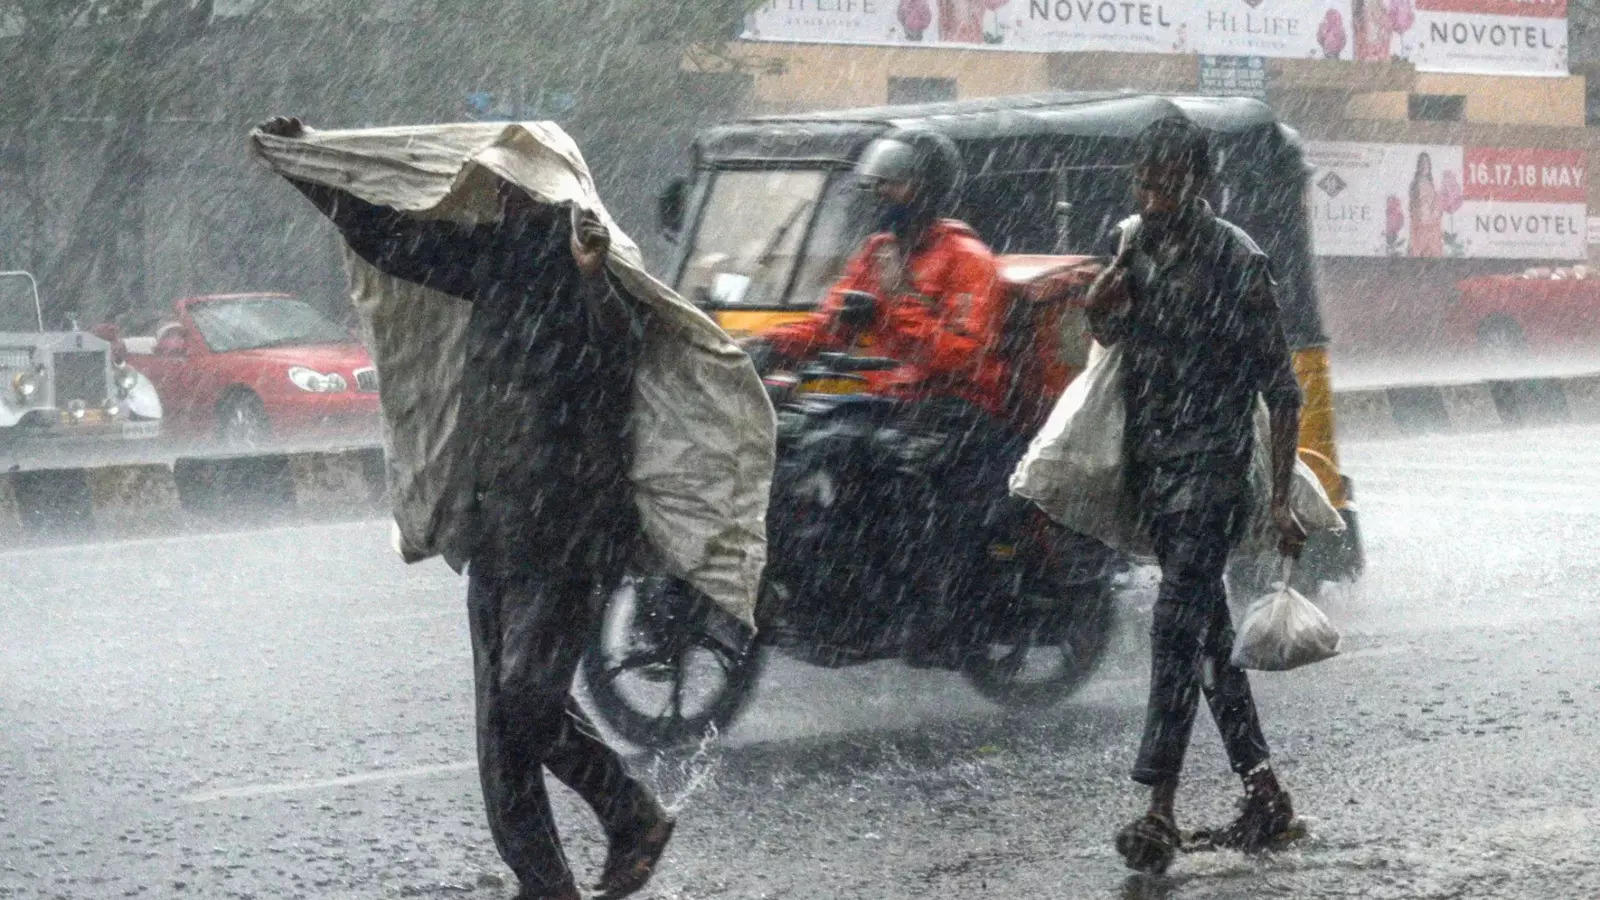 Kerala rains: High probability of flooding in 6 districts; emergency centres, hospitals on alert